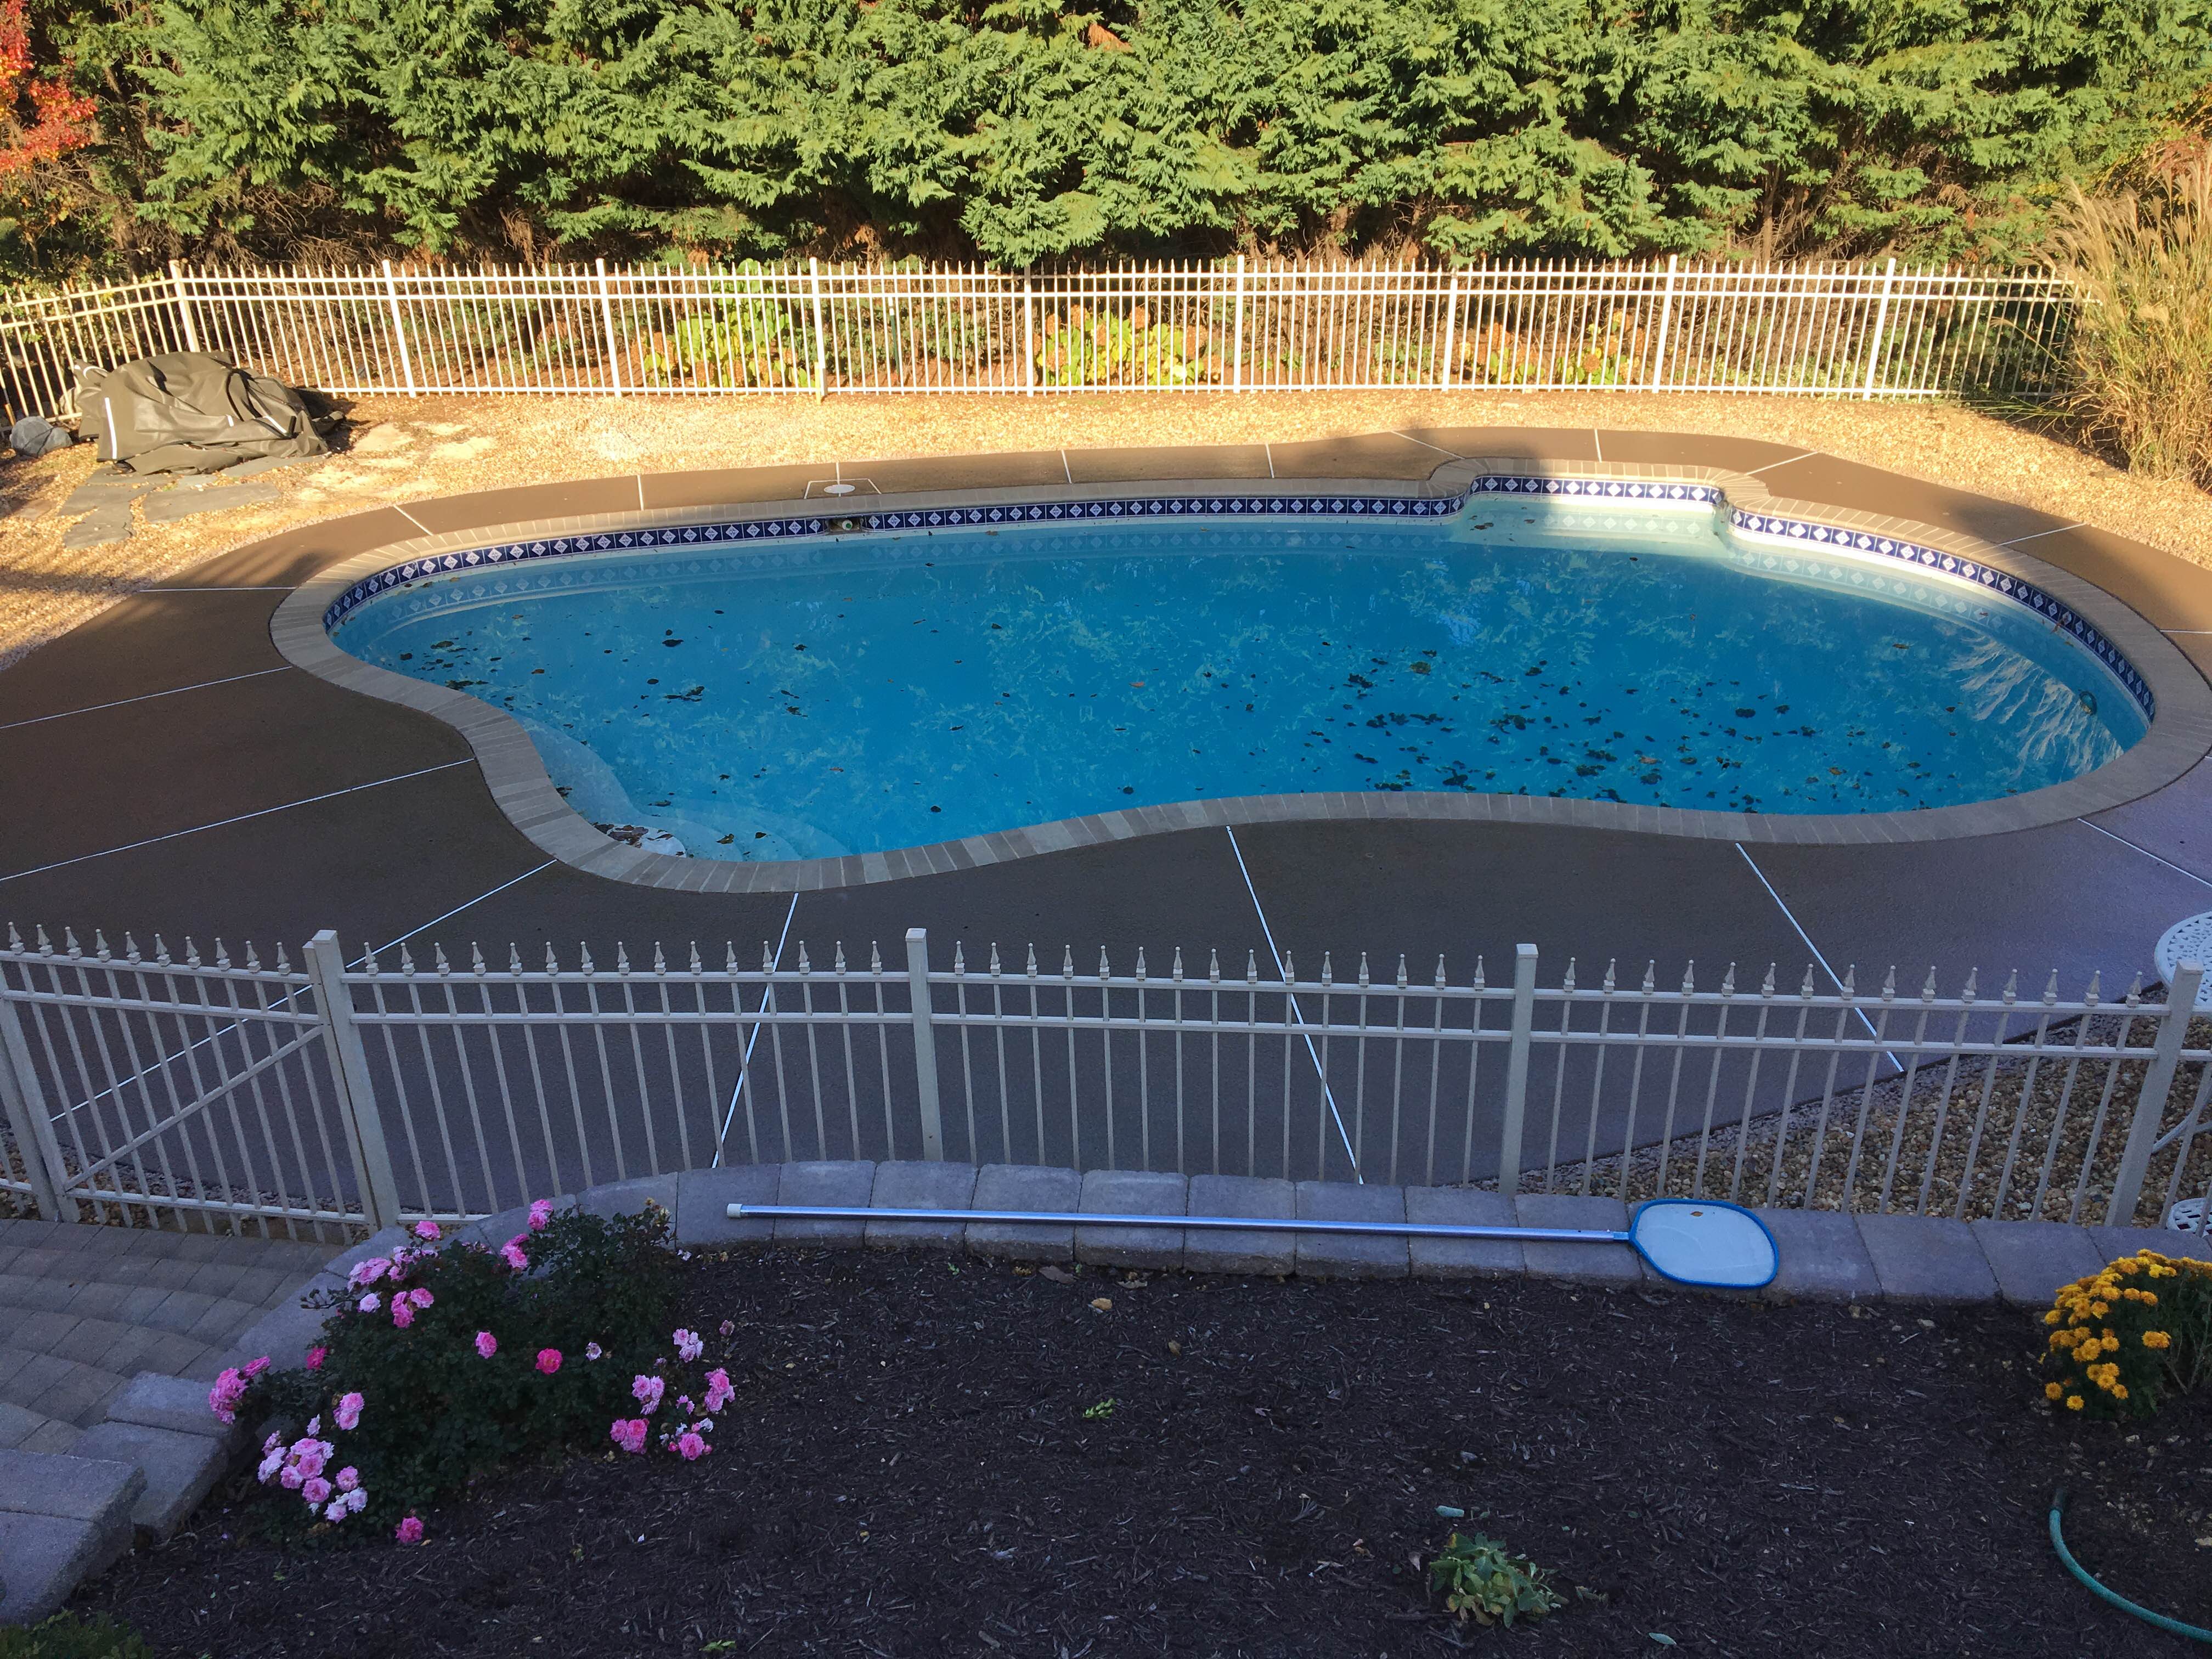 Custom Concrete Pool Deck in Northern Virginia | Designed and Installed by the Professionals at Blackwater Concrete